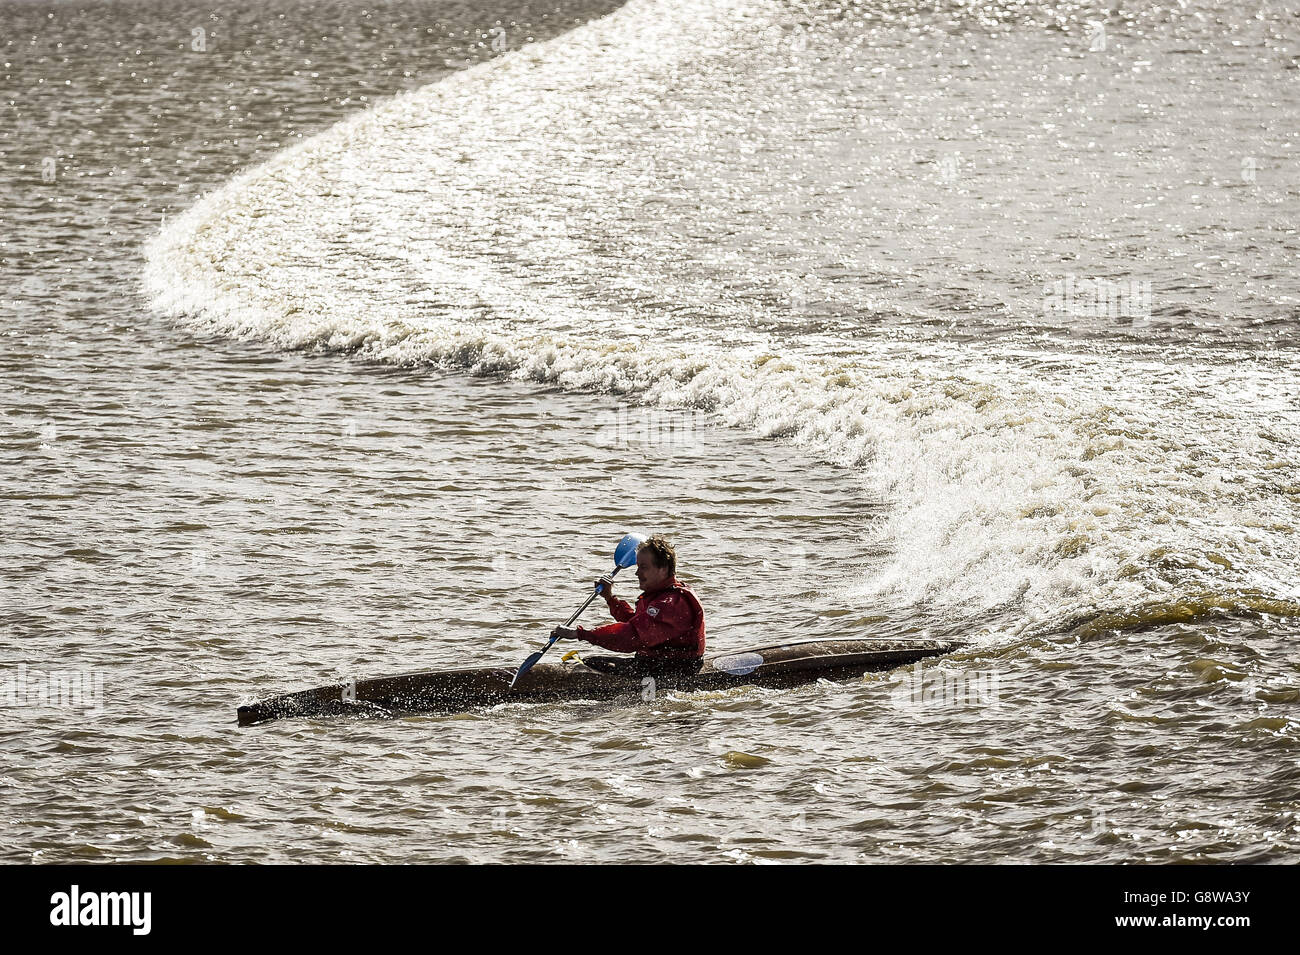 A kayaker catches the Severn Bore wave at Newnham, Gloucestershire, as the 4-star rated tidal bore passes up the Severn Estuary. Stock Photo